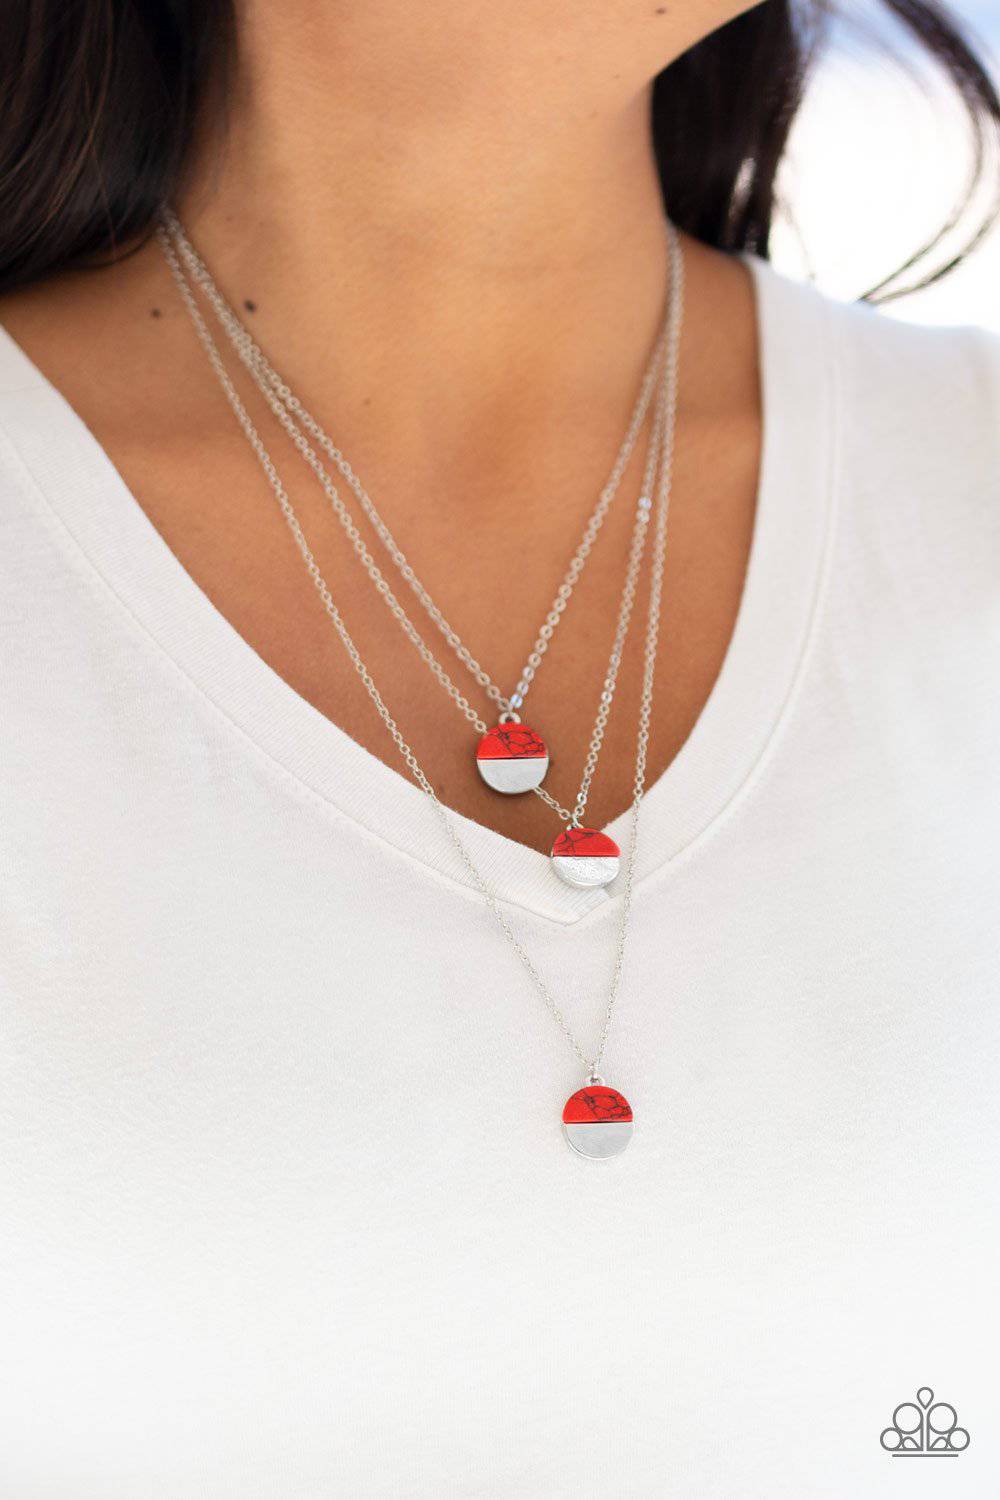 Rural Reconstruction - Red Stone Layered Necklace - Paparazzi Accessories - GlaMarous Titi Jewels